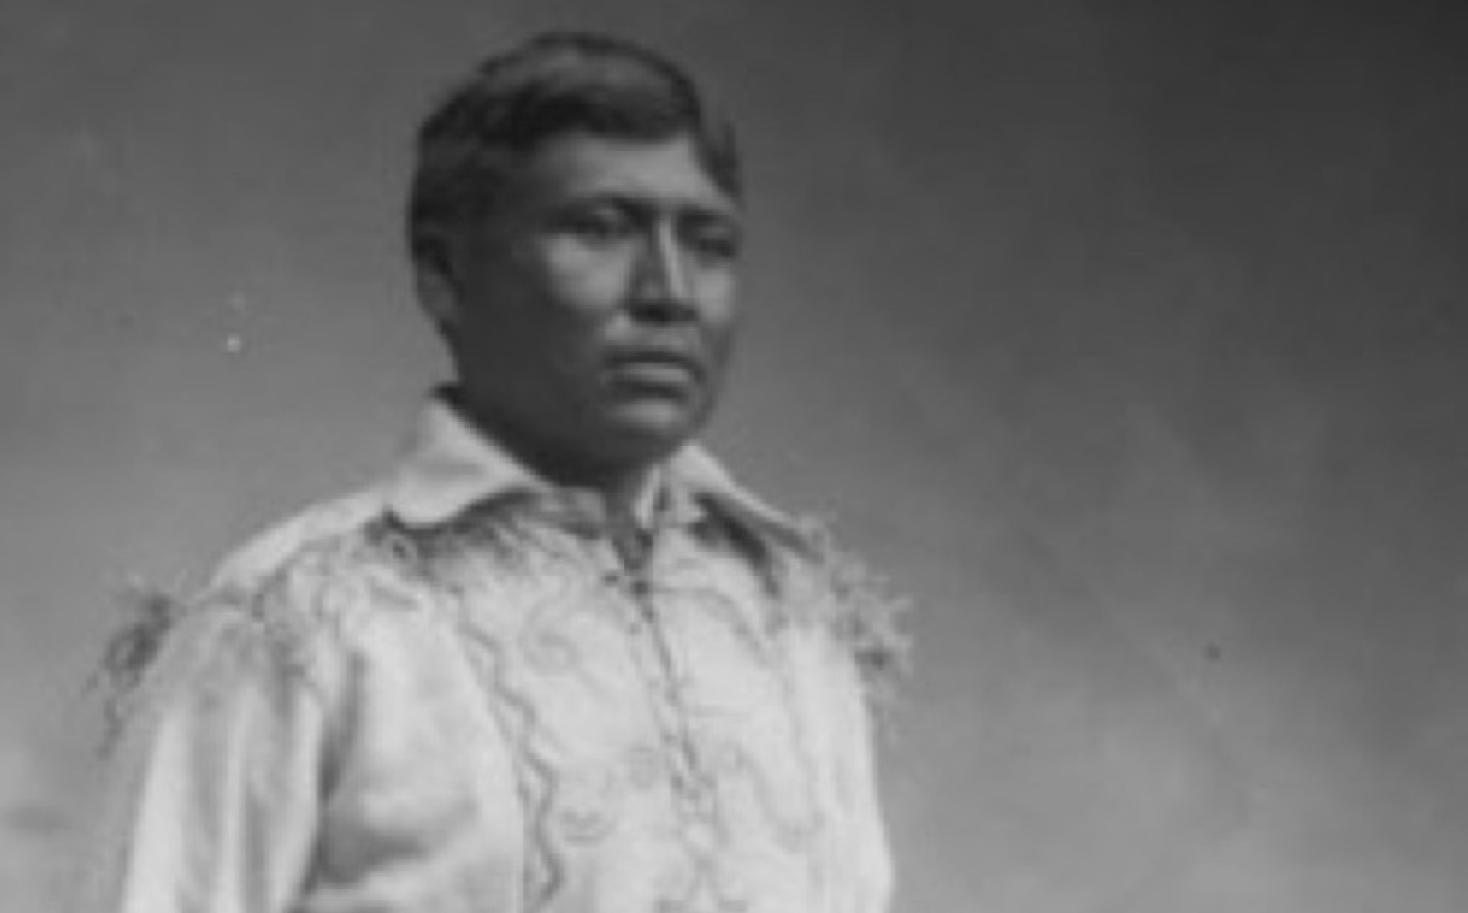 A photo of Chief Jim Boss standing in traditional clothes with one hand on the back of the chair